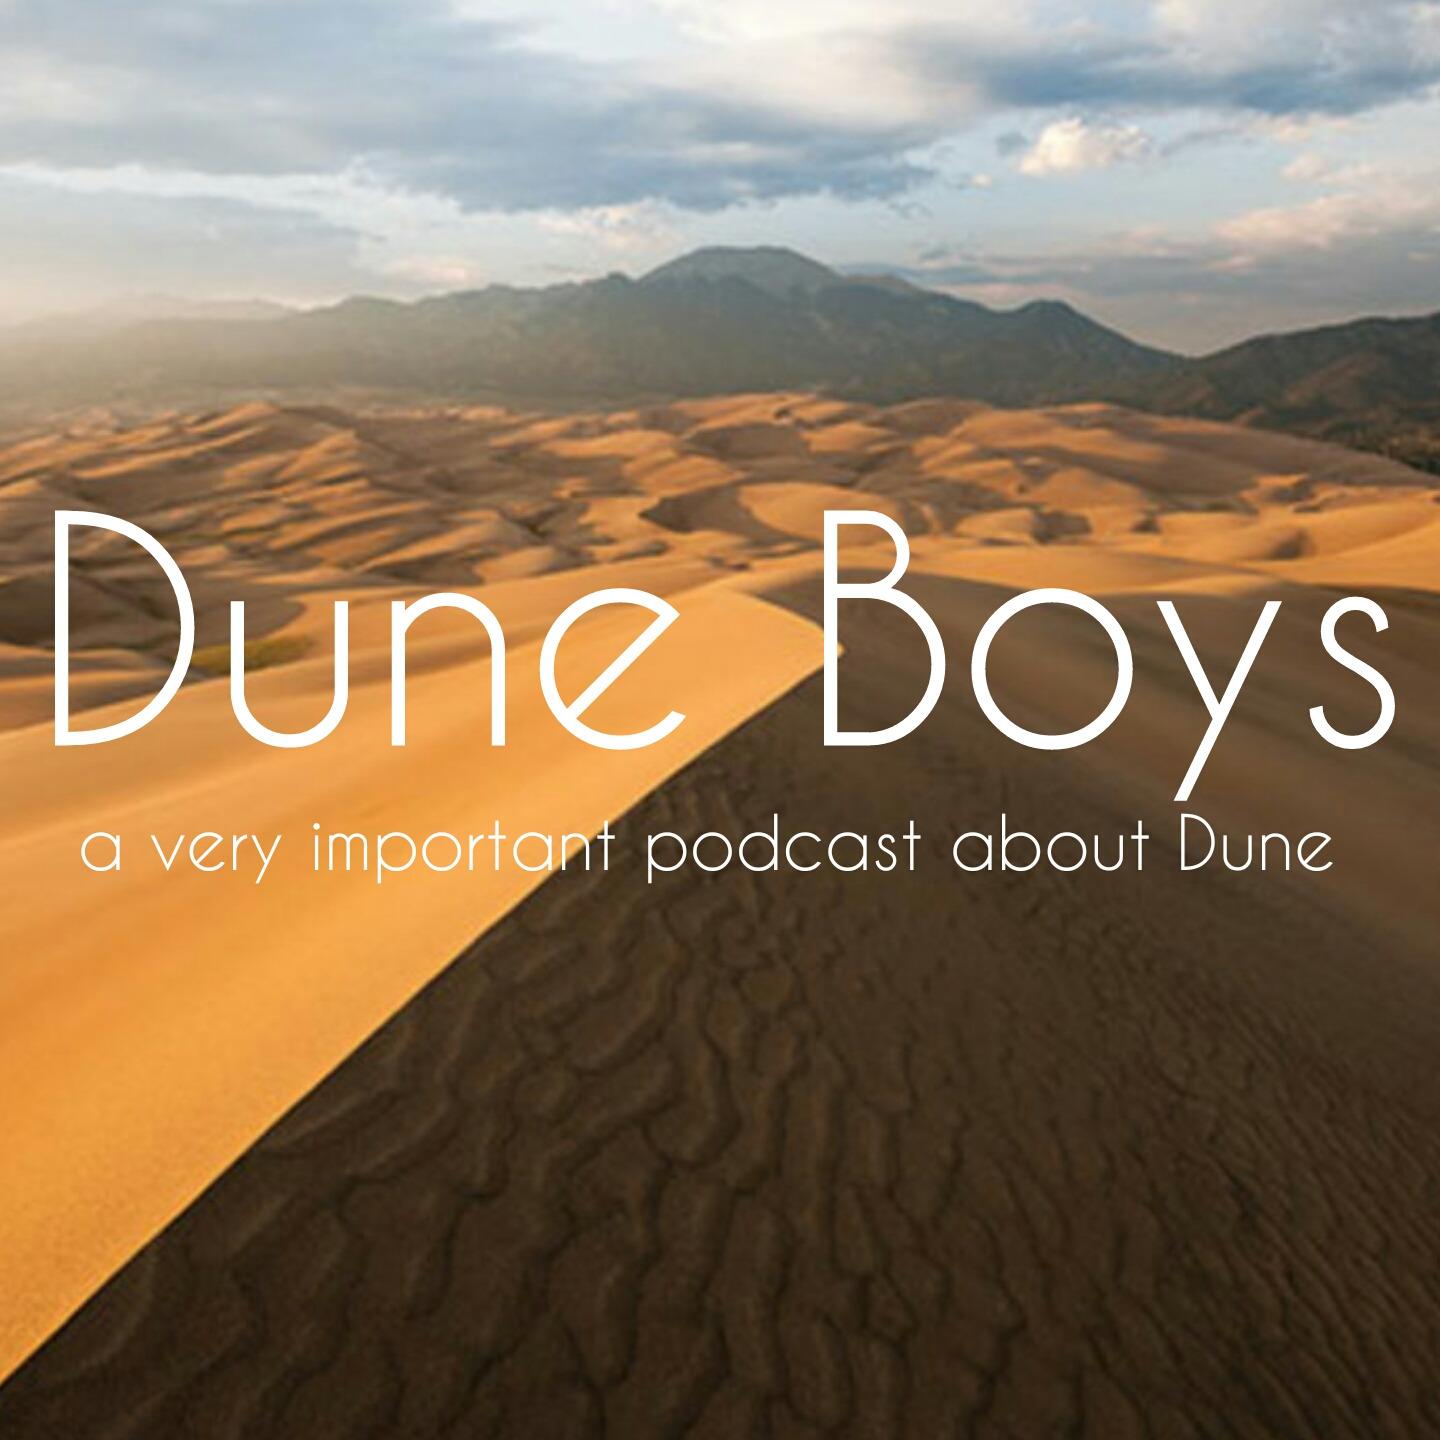 Duneboys A Very Important Podcast About Dune